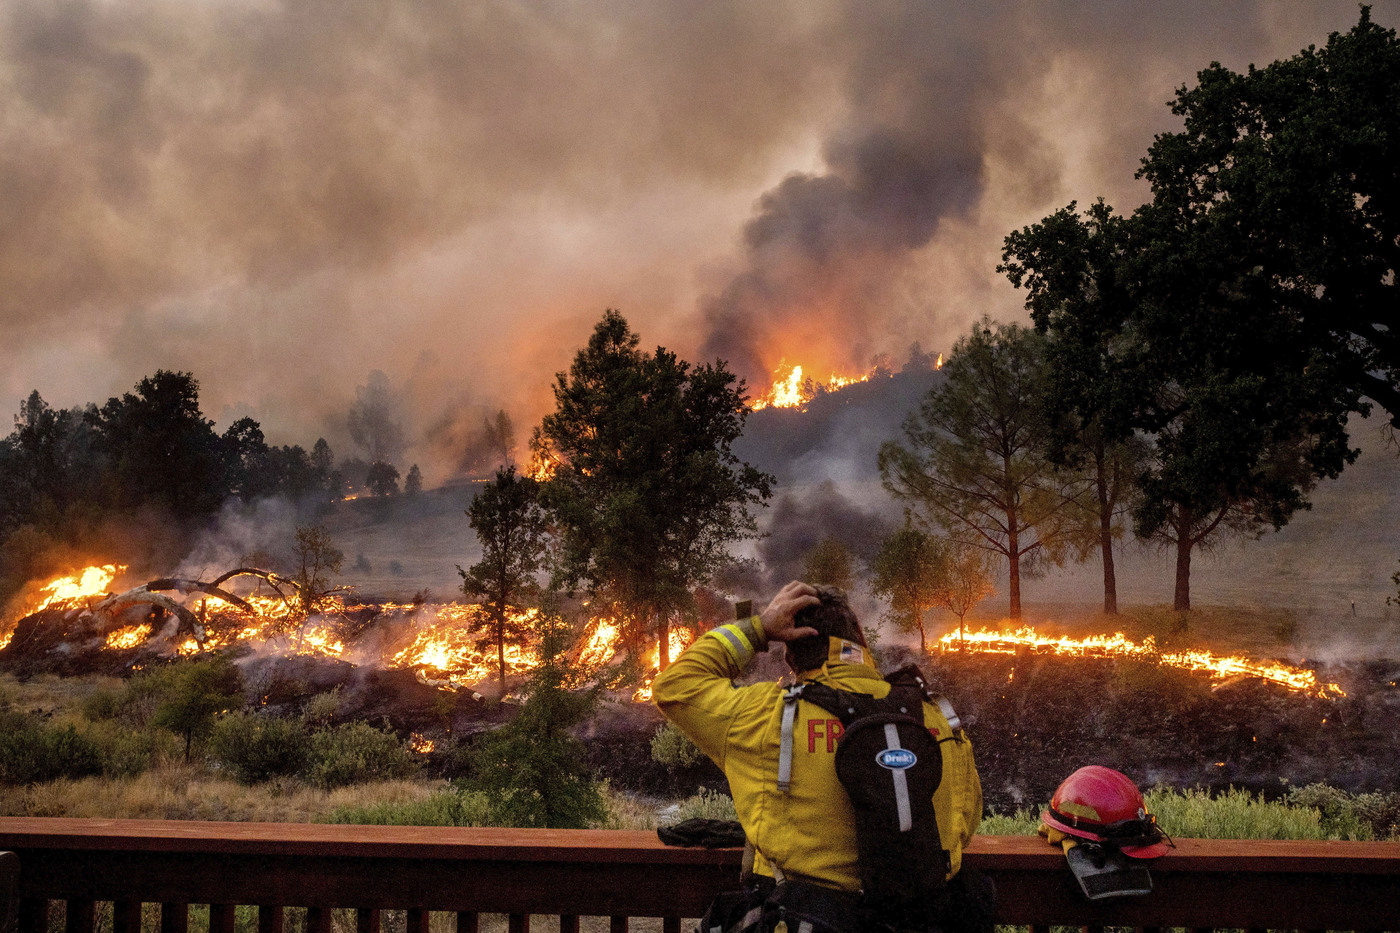 A firefighter rubs his head while watching the LNU Lightning Complex fires spread through the Berryessa Estates neighborhood of unincorporated Napa County, Calif., on Friday, Aug. 21, 2020. The blaze forced thousands to flee and destroyed hundreds of homes and other structures. (AP Photo/Noah Berger)